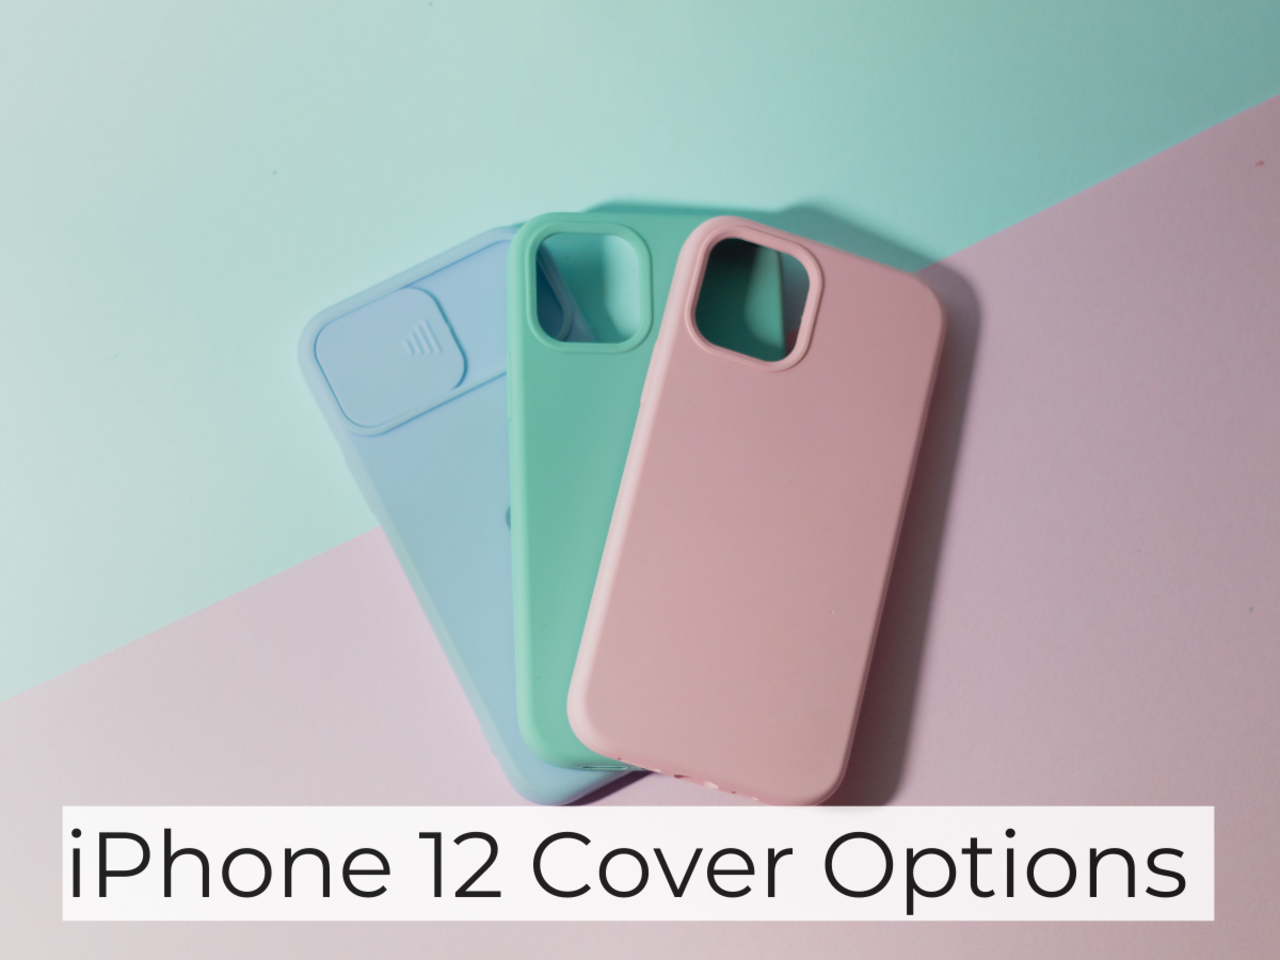 Mobile Covers For iPhone 12 Pro With Unique Designs, Patterns And Themes -  Times of India